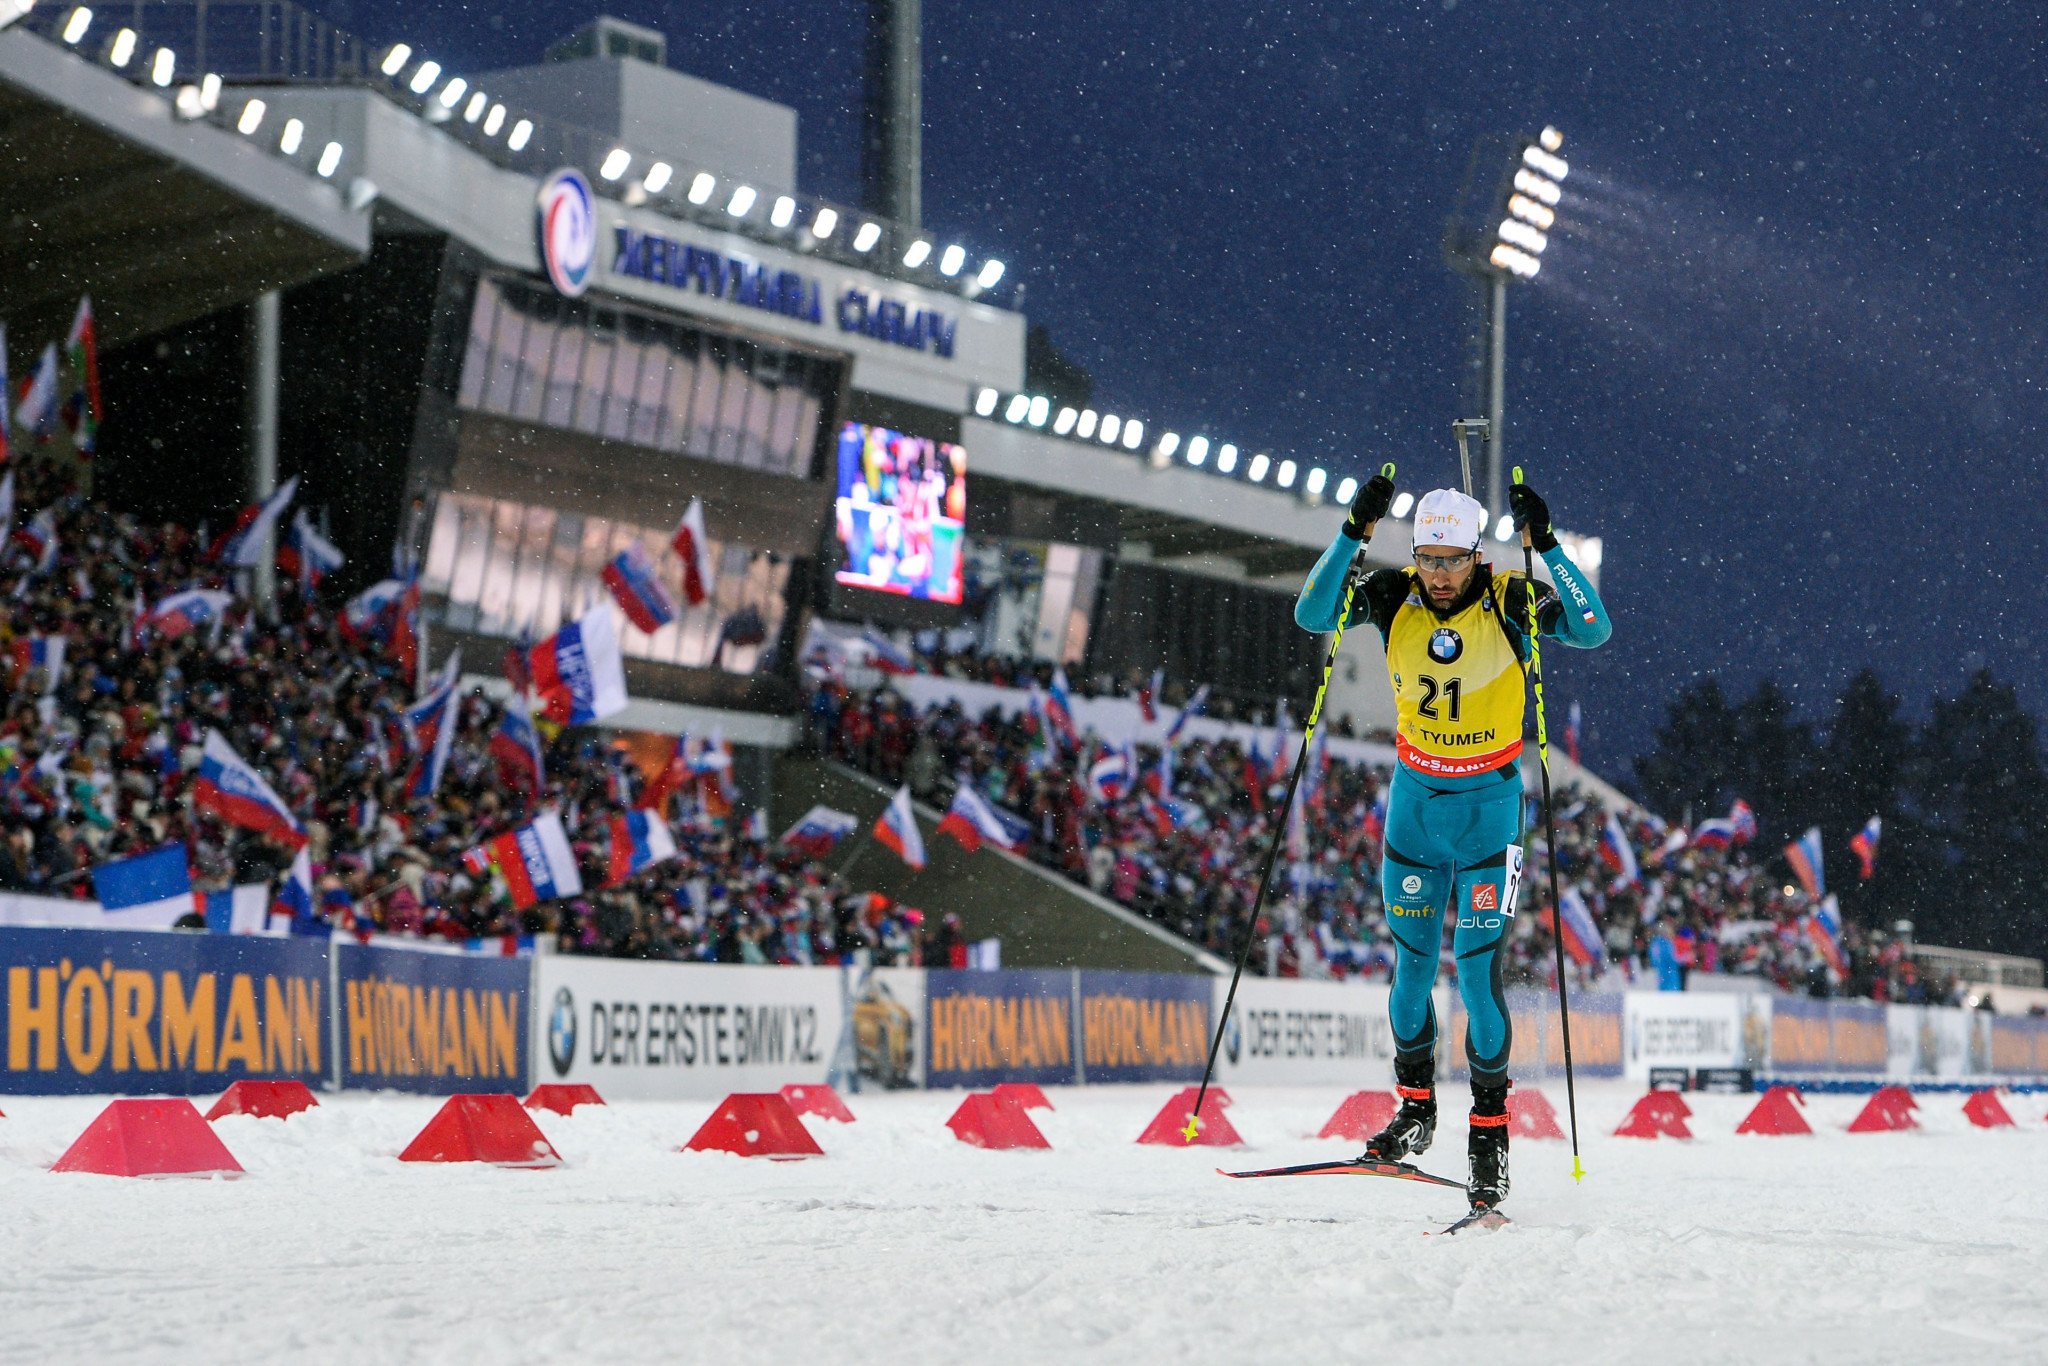 Russia last hosted an event on the IBU World Cup calendar earlier this year ©Getty Images